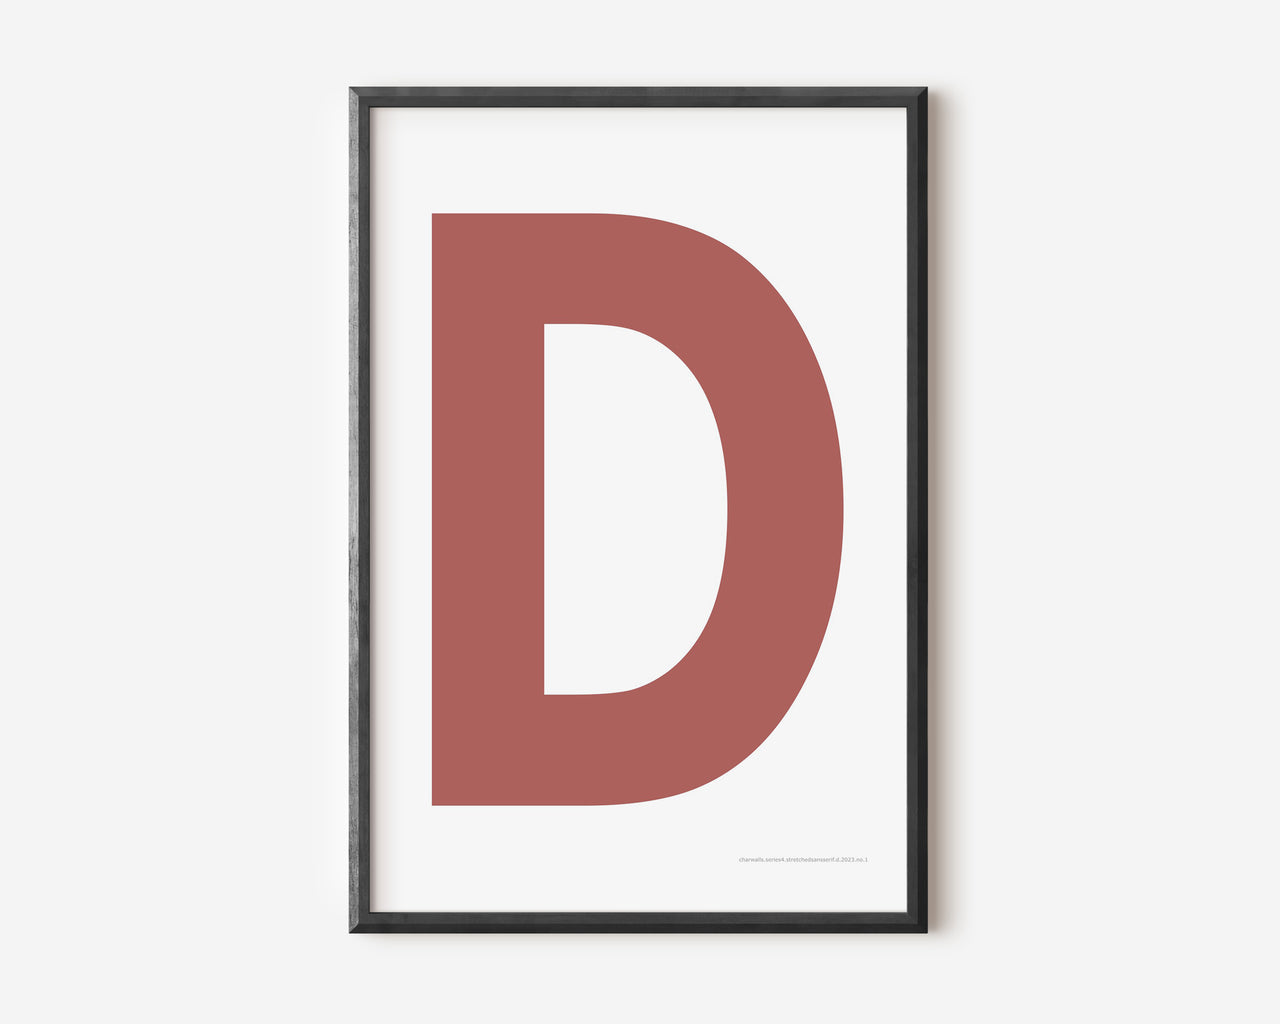 Modern art print with an uppercase Nantucket red letter D on a white background.